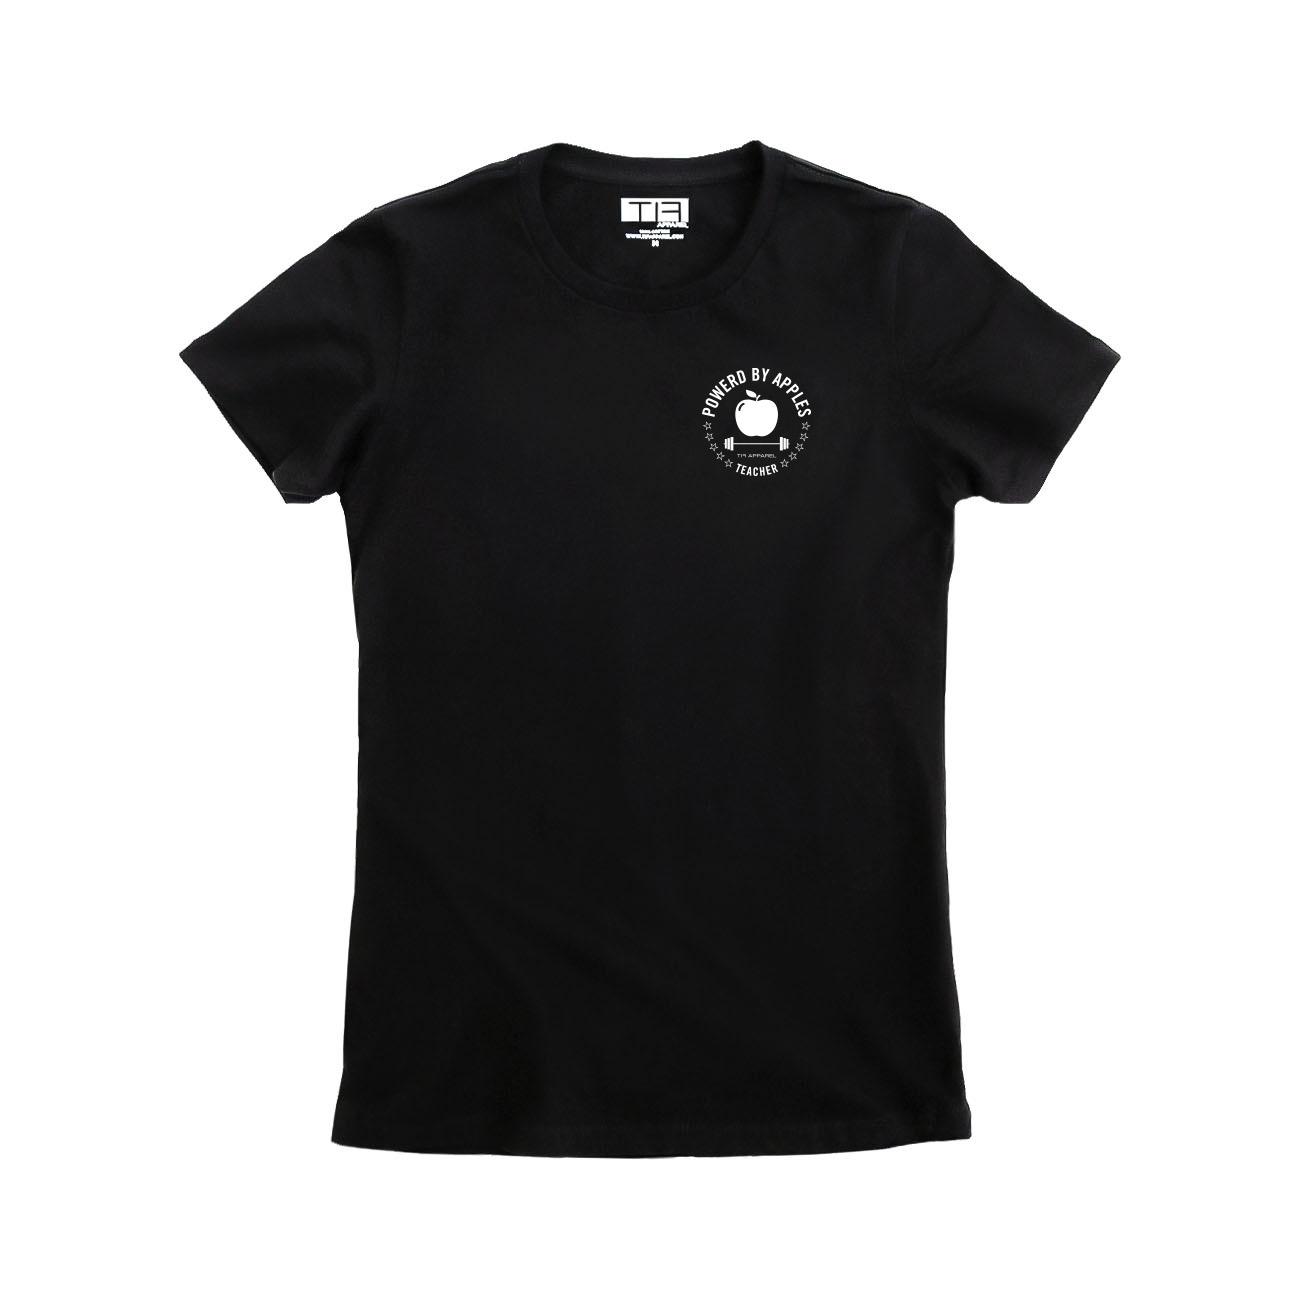 Women's Limited-Edition Make Herstory Printed T-Shirt in Black Size Xxs | White House Black Market